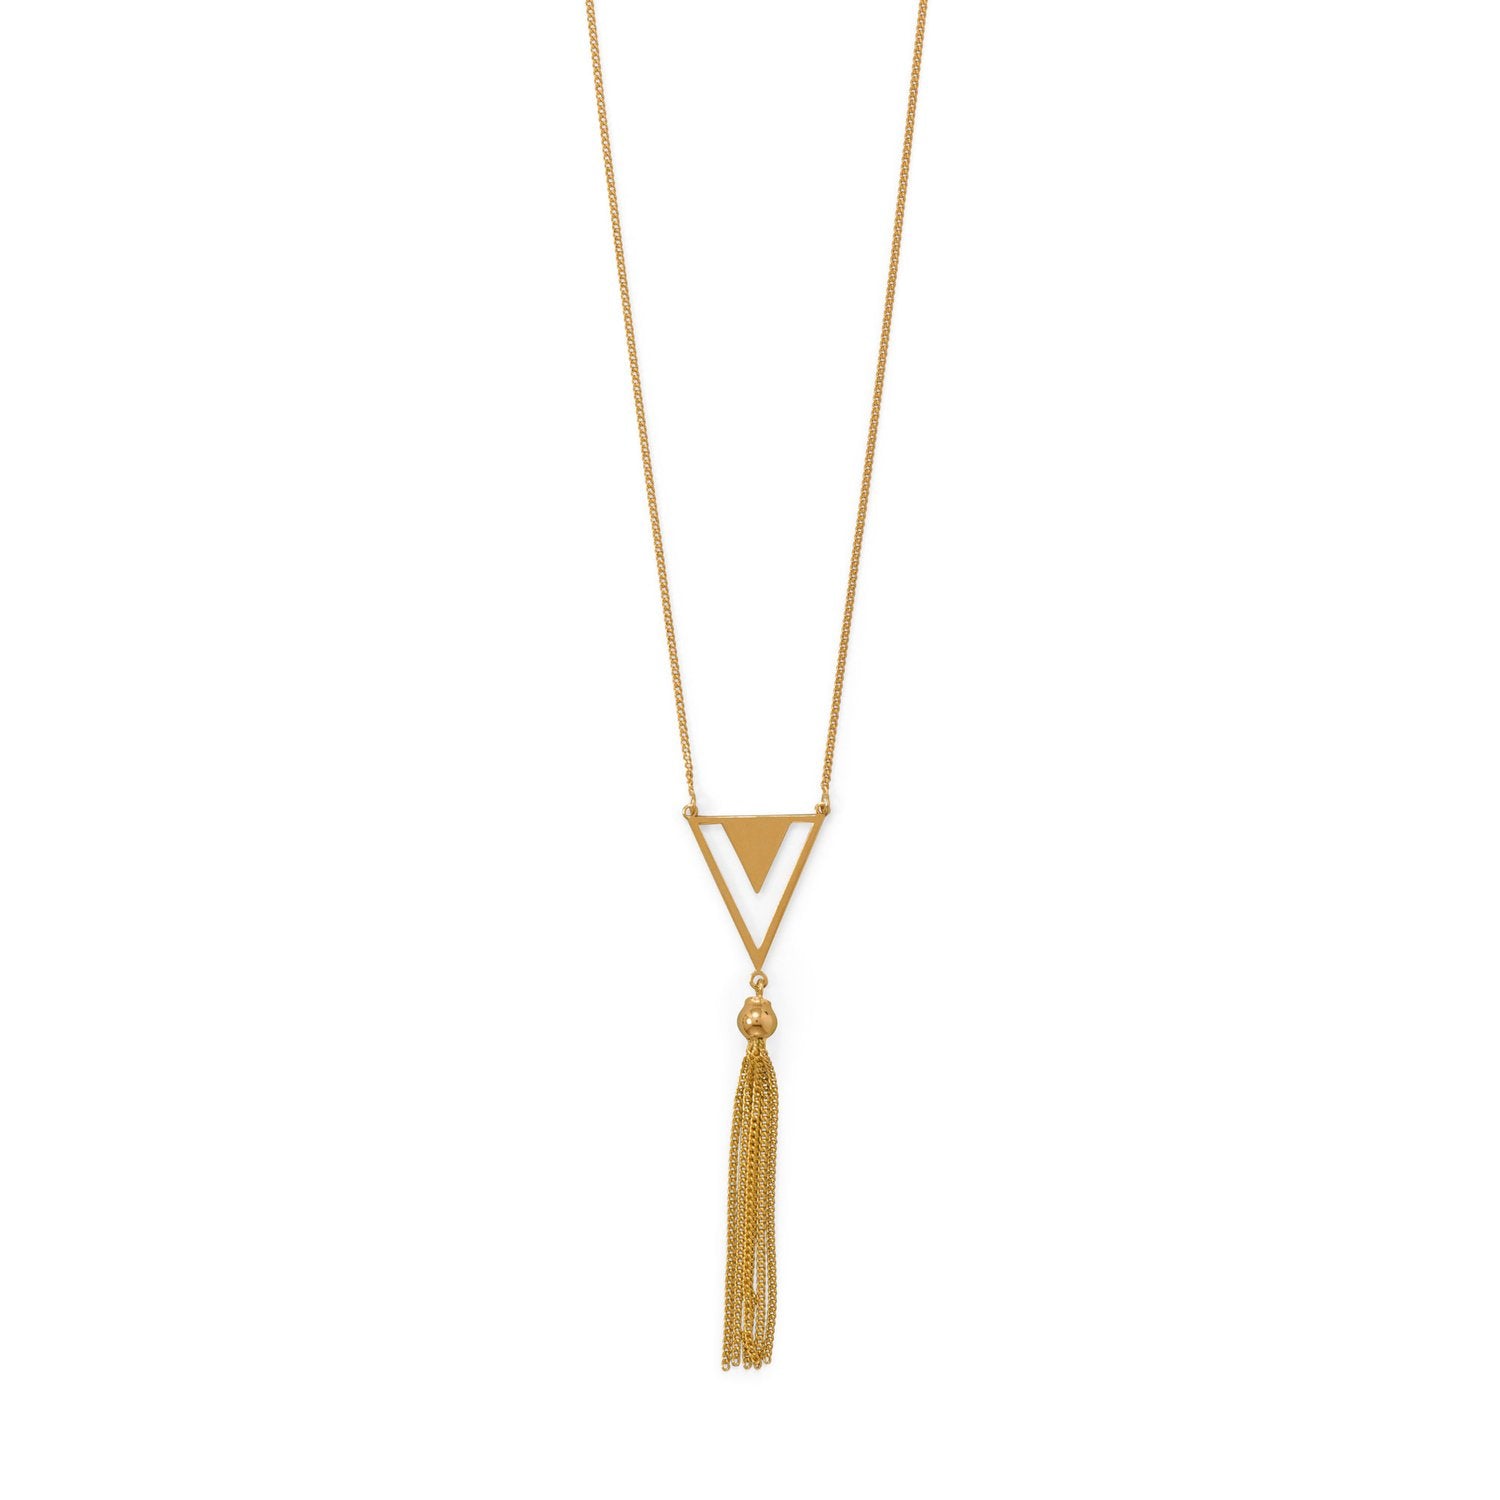 Totally Tassel! 32"+2 14 Karat Gold Plated Triangle and Tassel Necklace